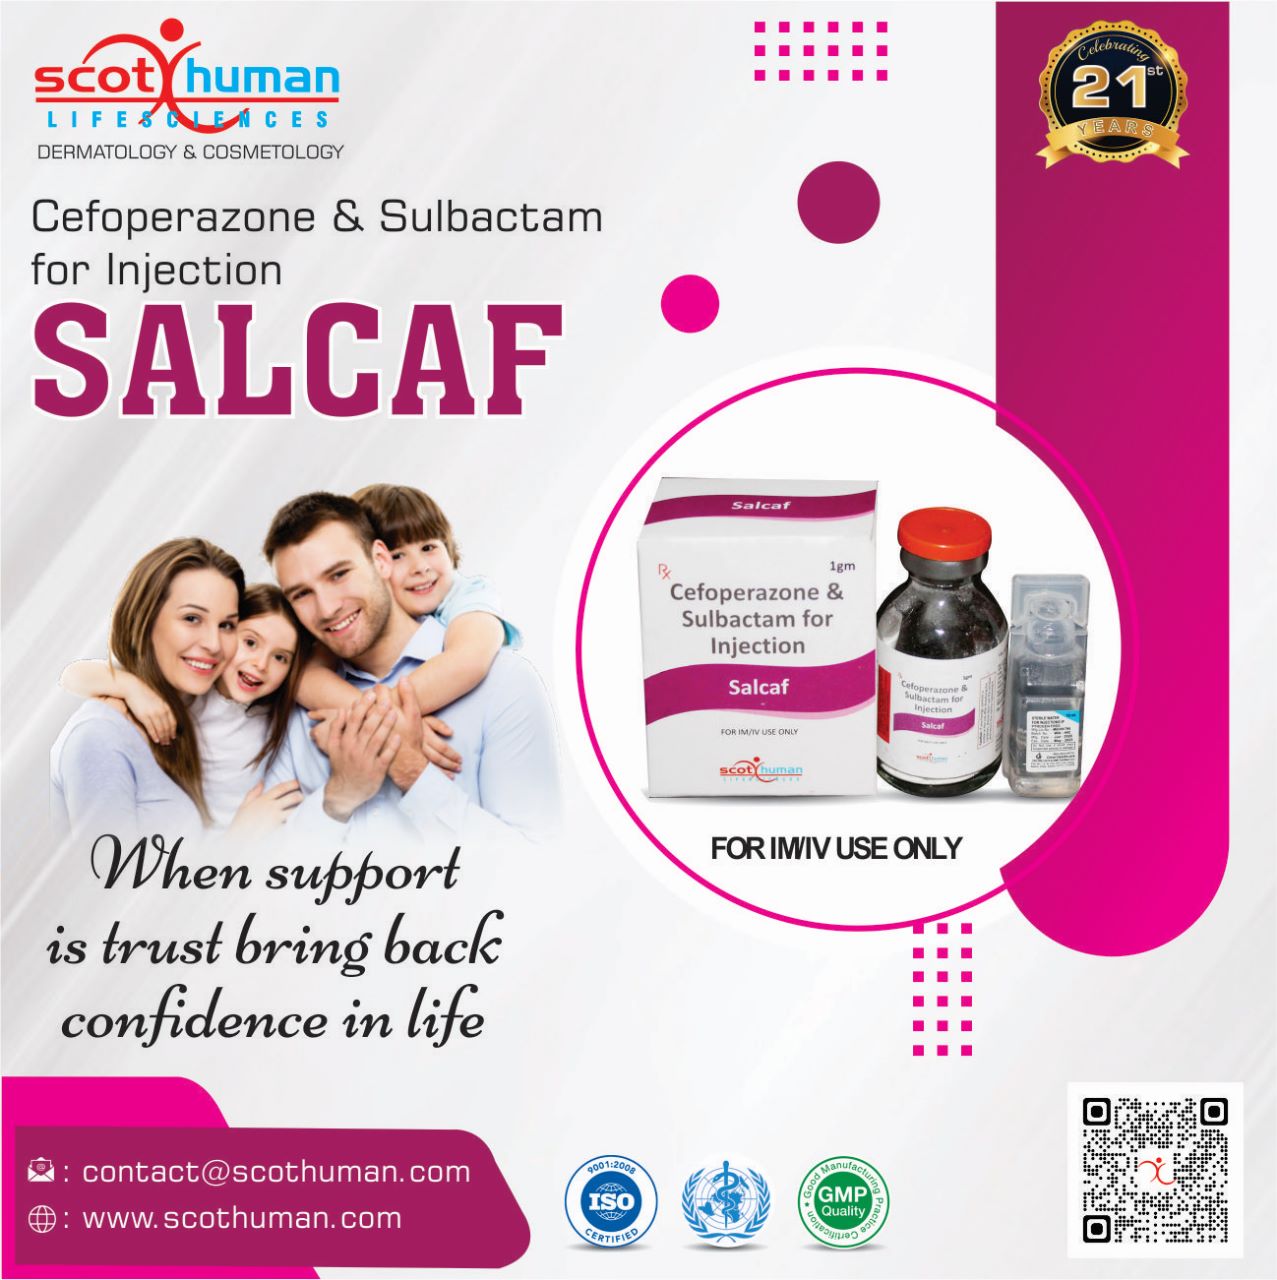 Product Name: Salcaf, Compositions of Salcaf are Cefoperazone & Sulbactam for Injection - Pharma Drugs and Chemicals